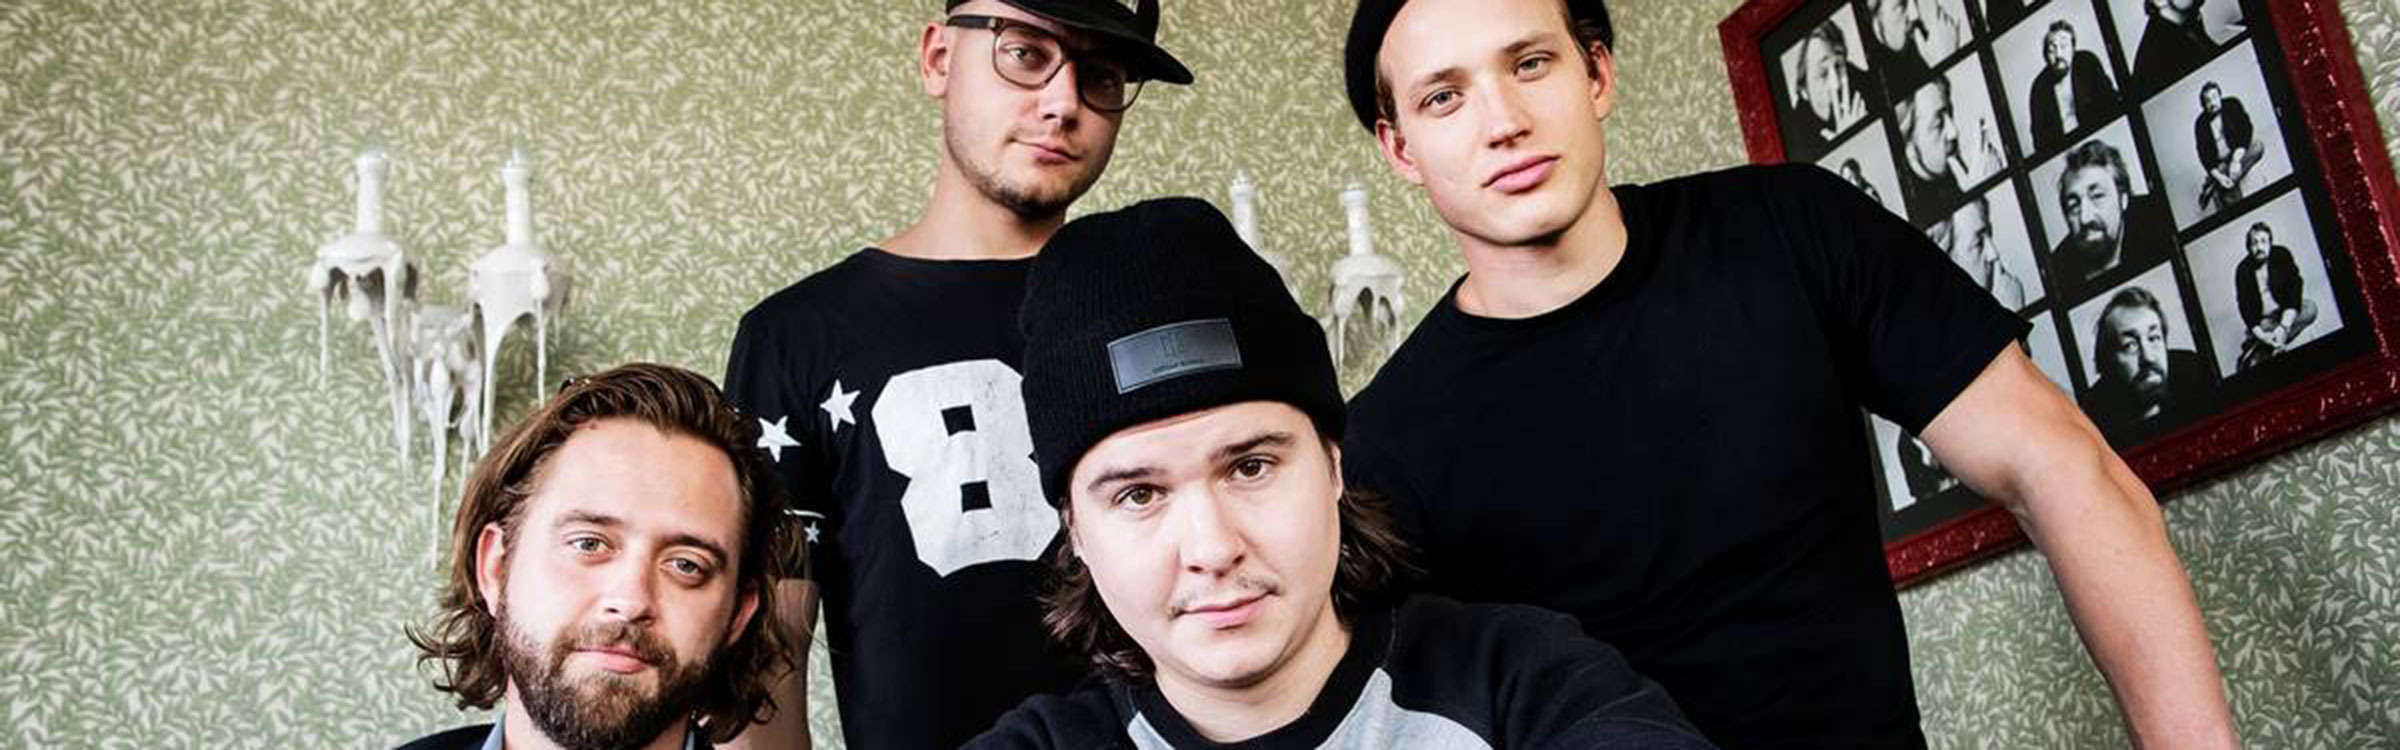 Lukas graham recovered